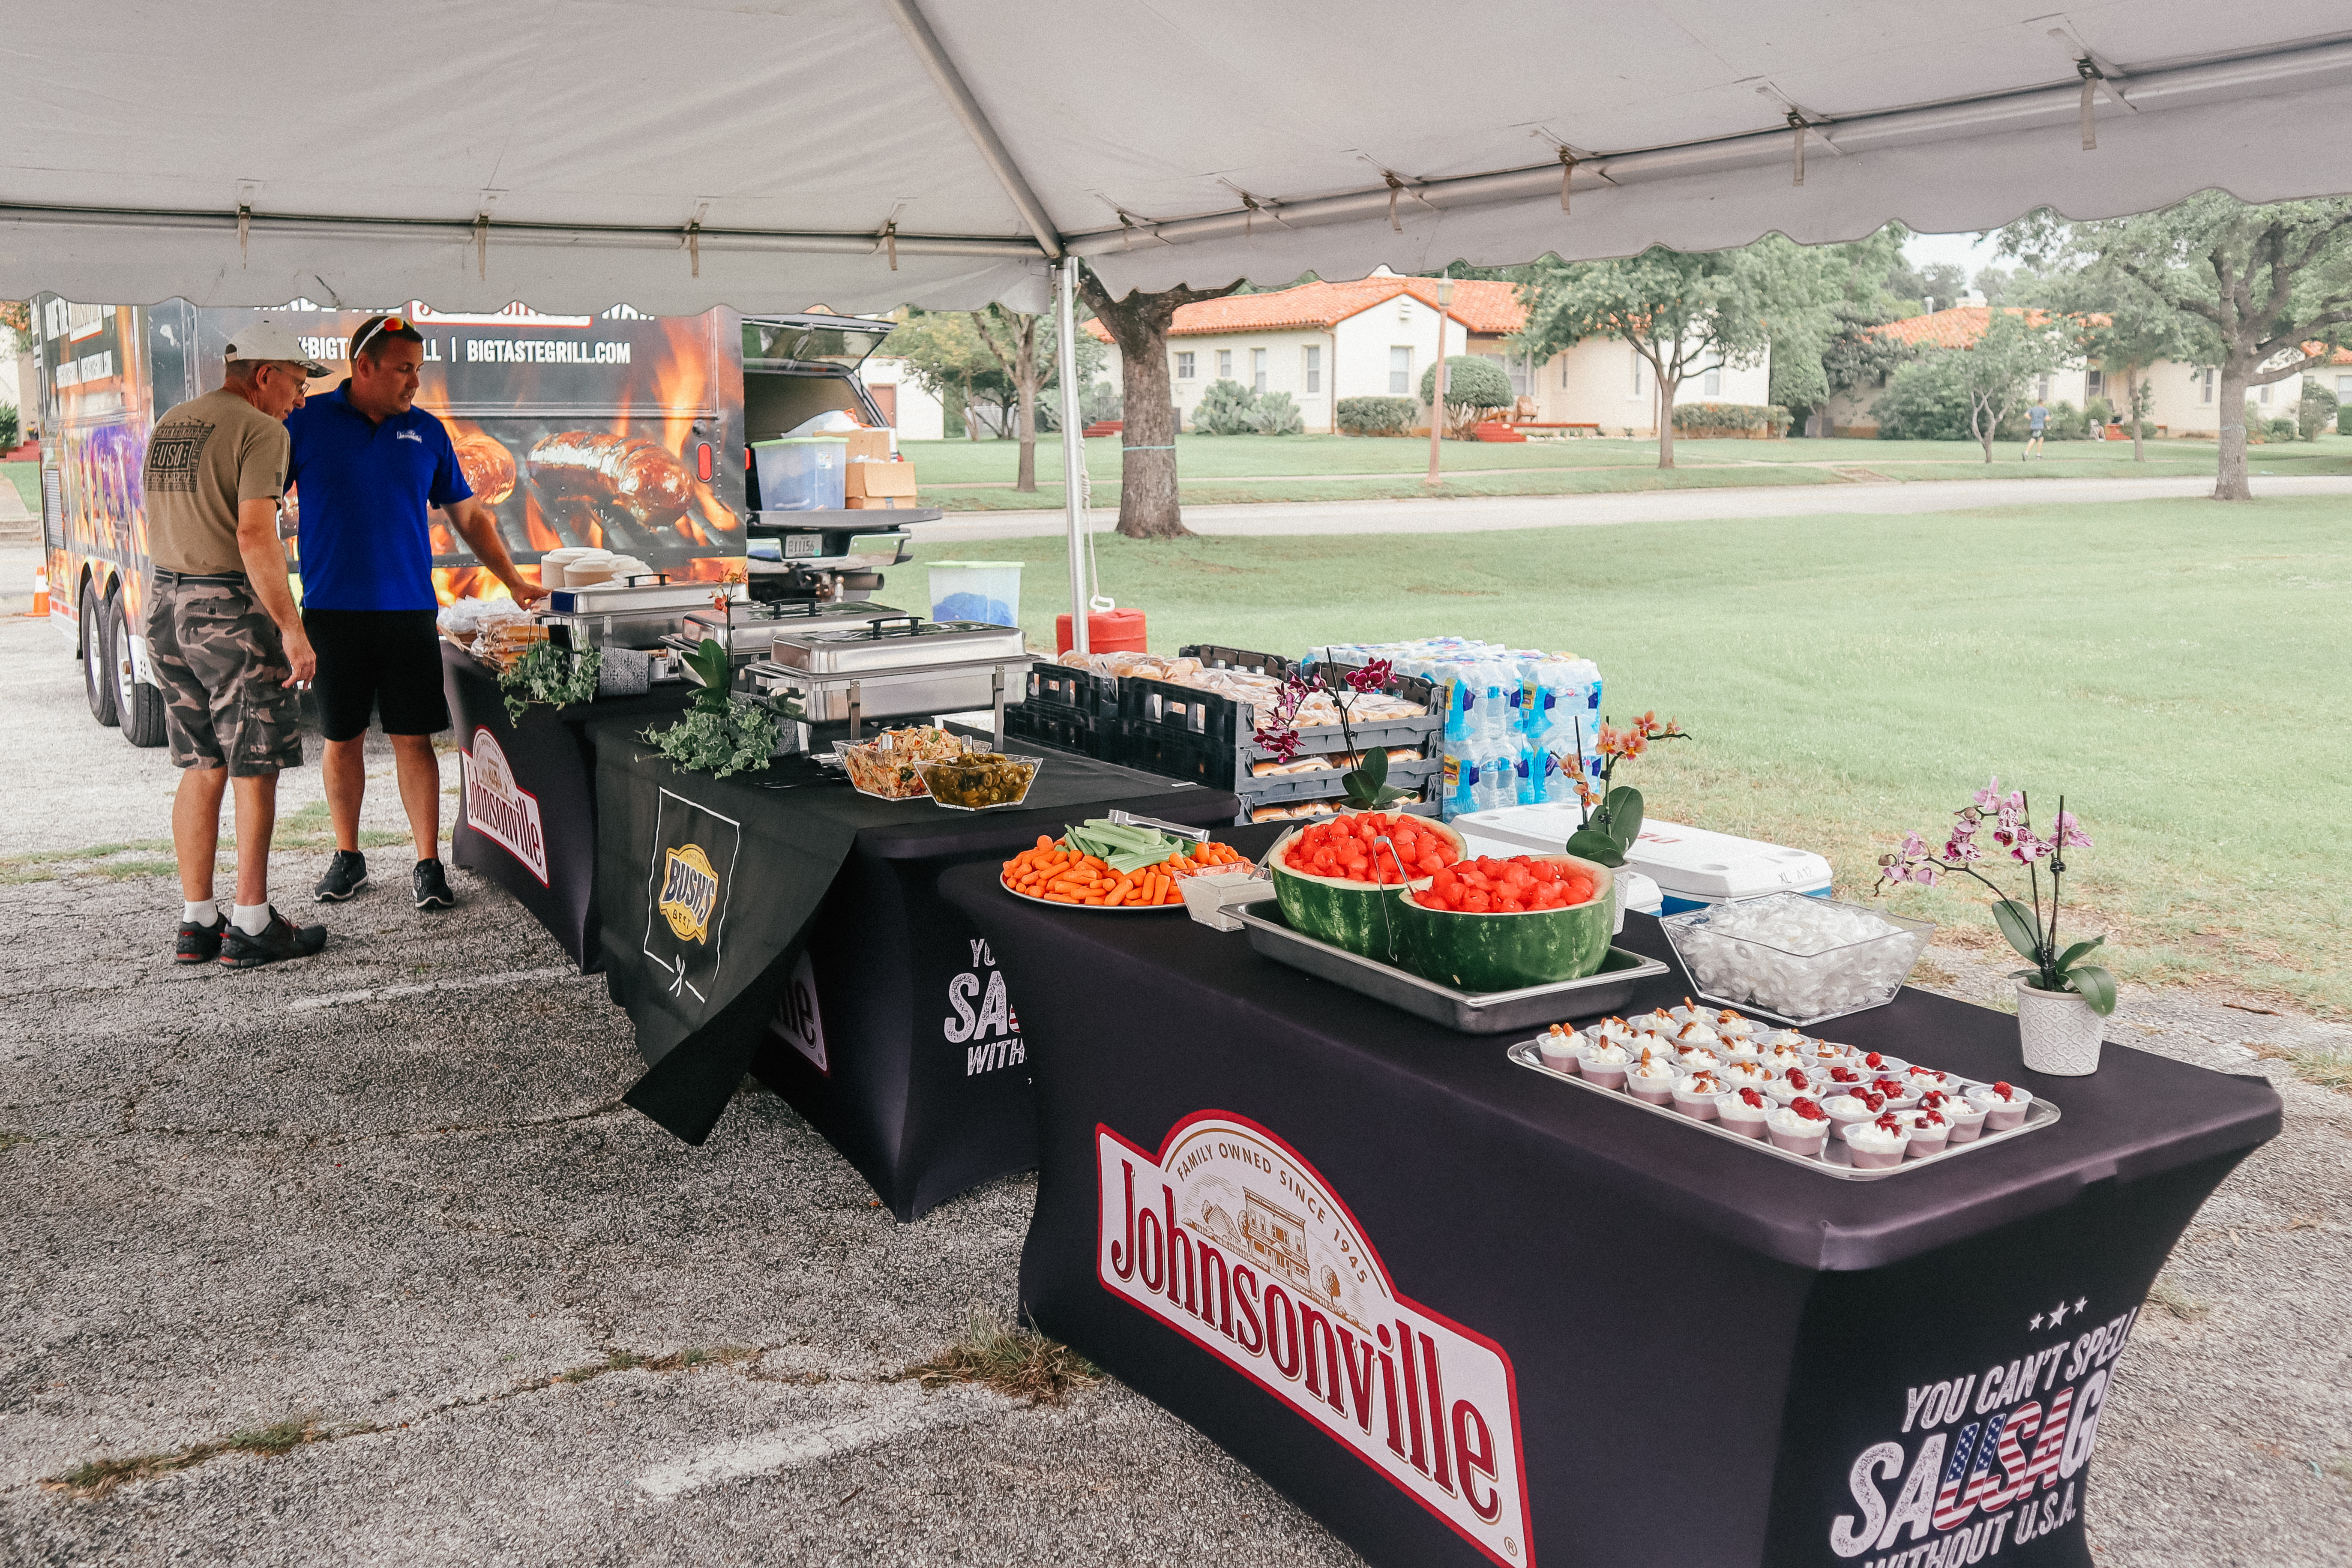 Military Spouse Appreciation with Johnsonville